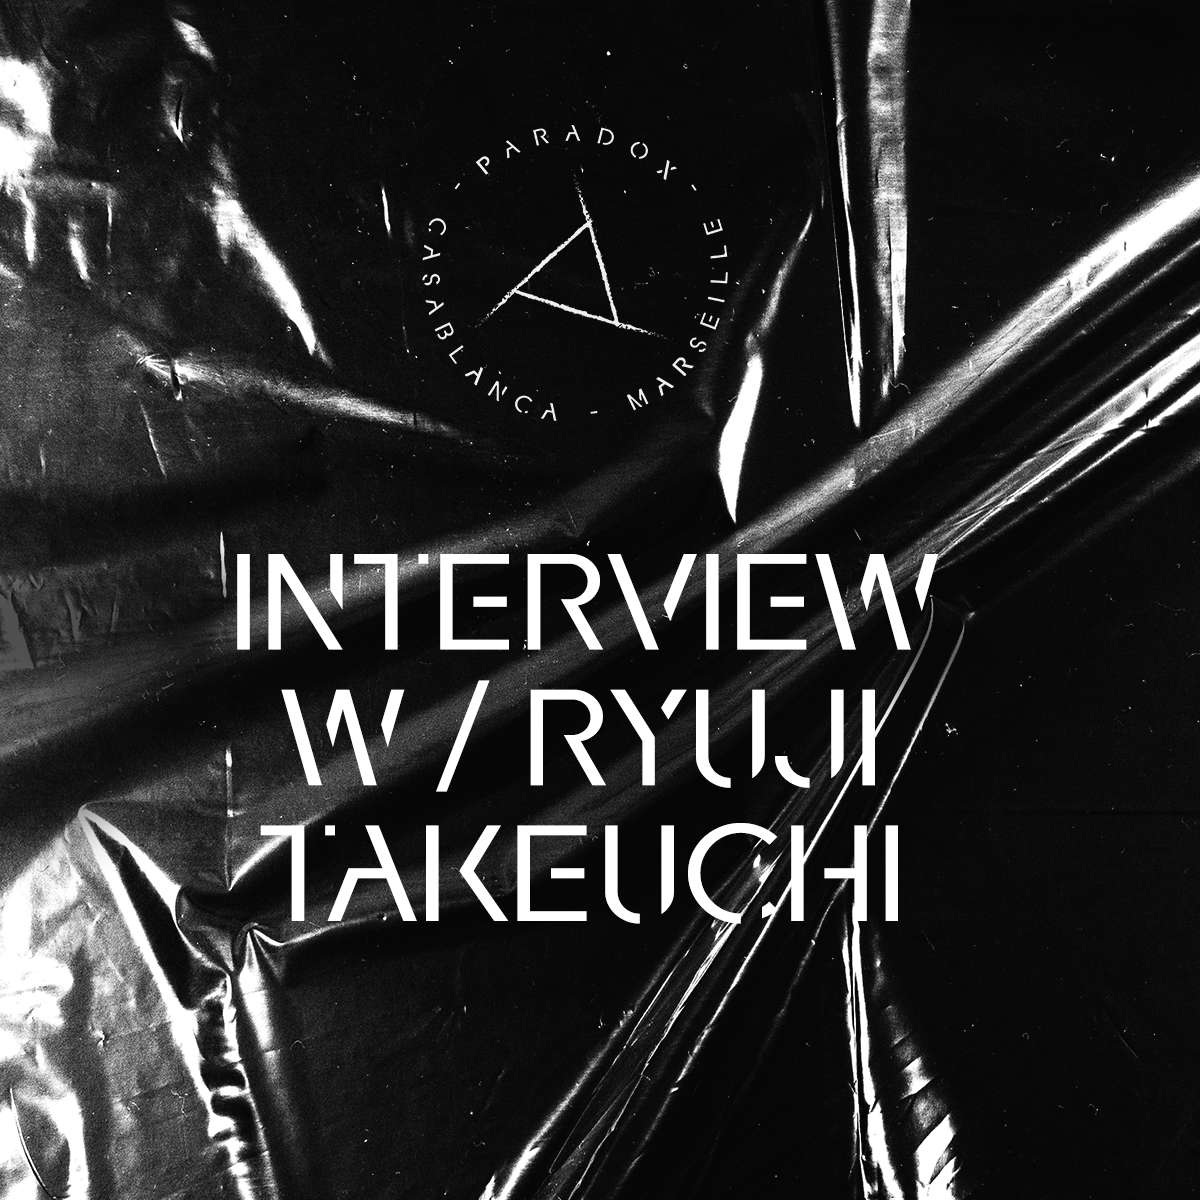 black and white cover of paradox techno interview with RYUJI TAKEUCHI